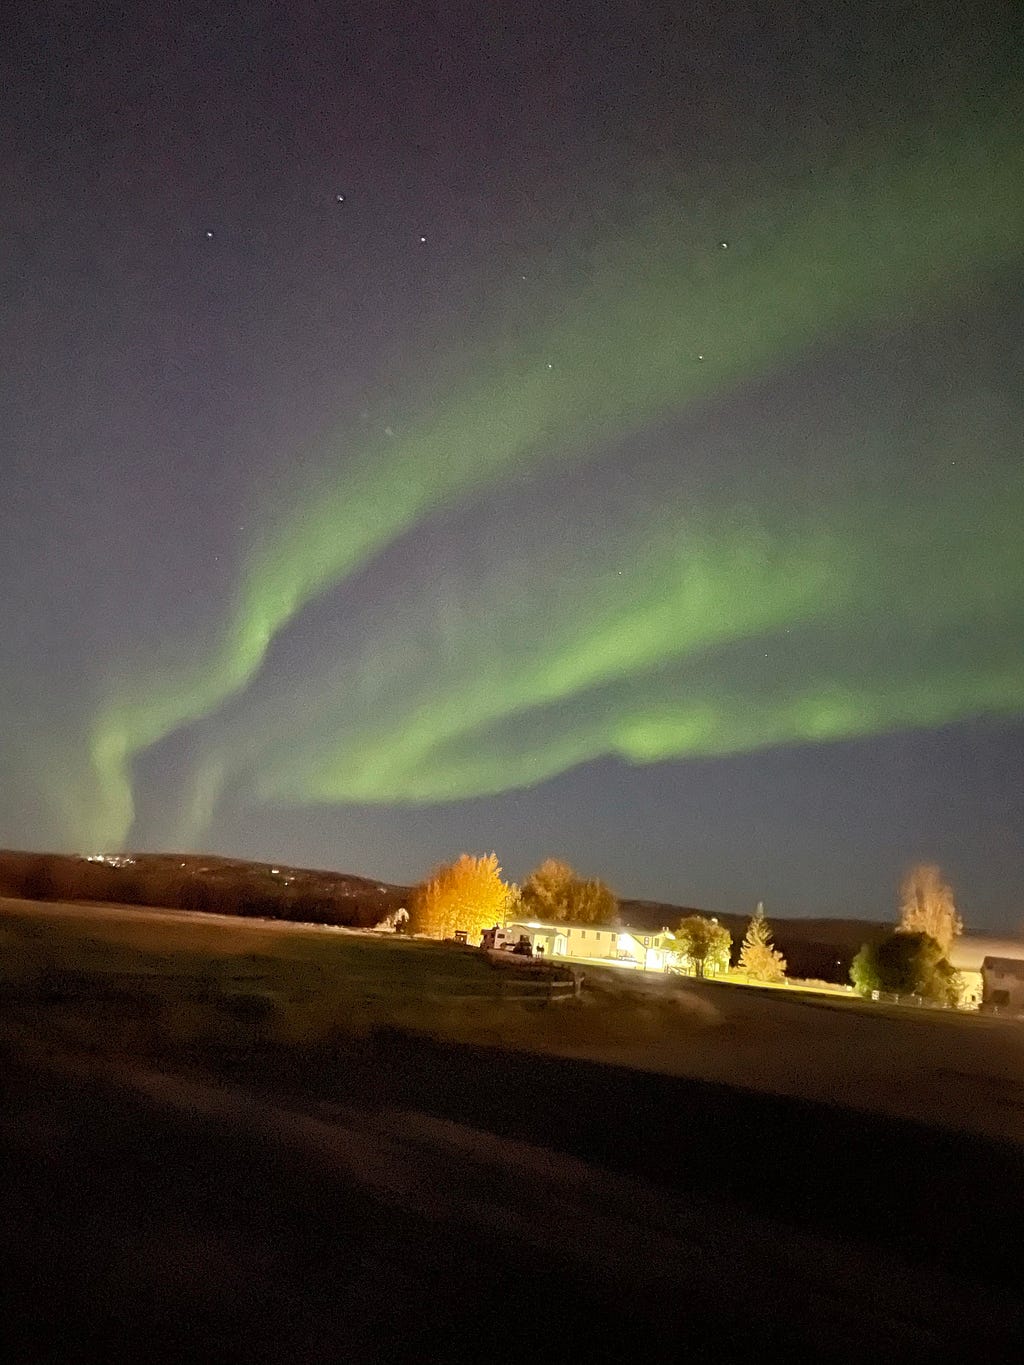 Checked seeing the northern lights out off my bucketlist!